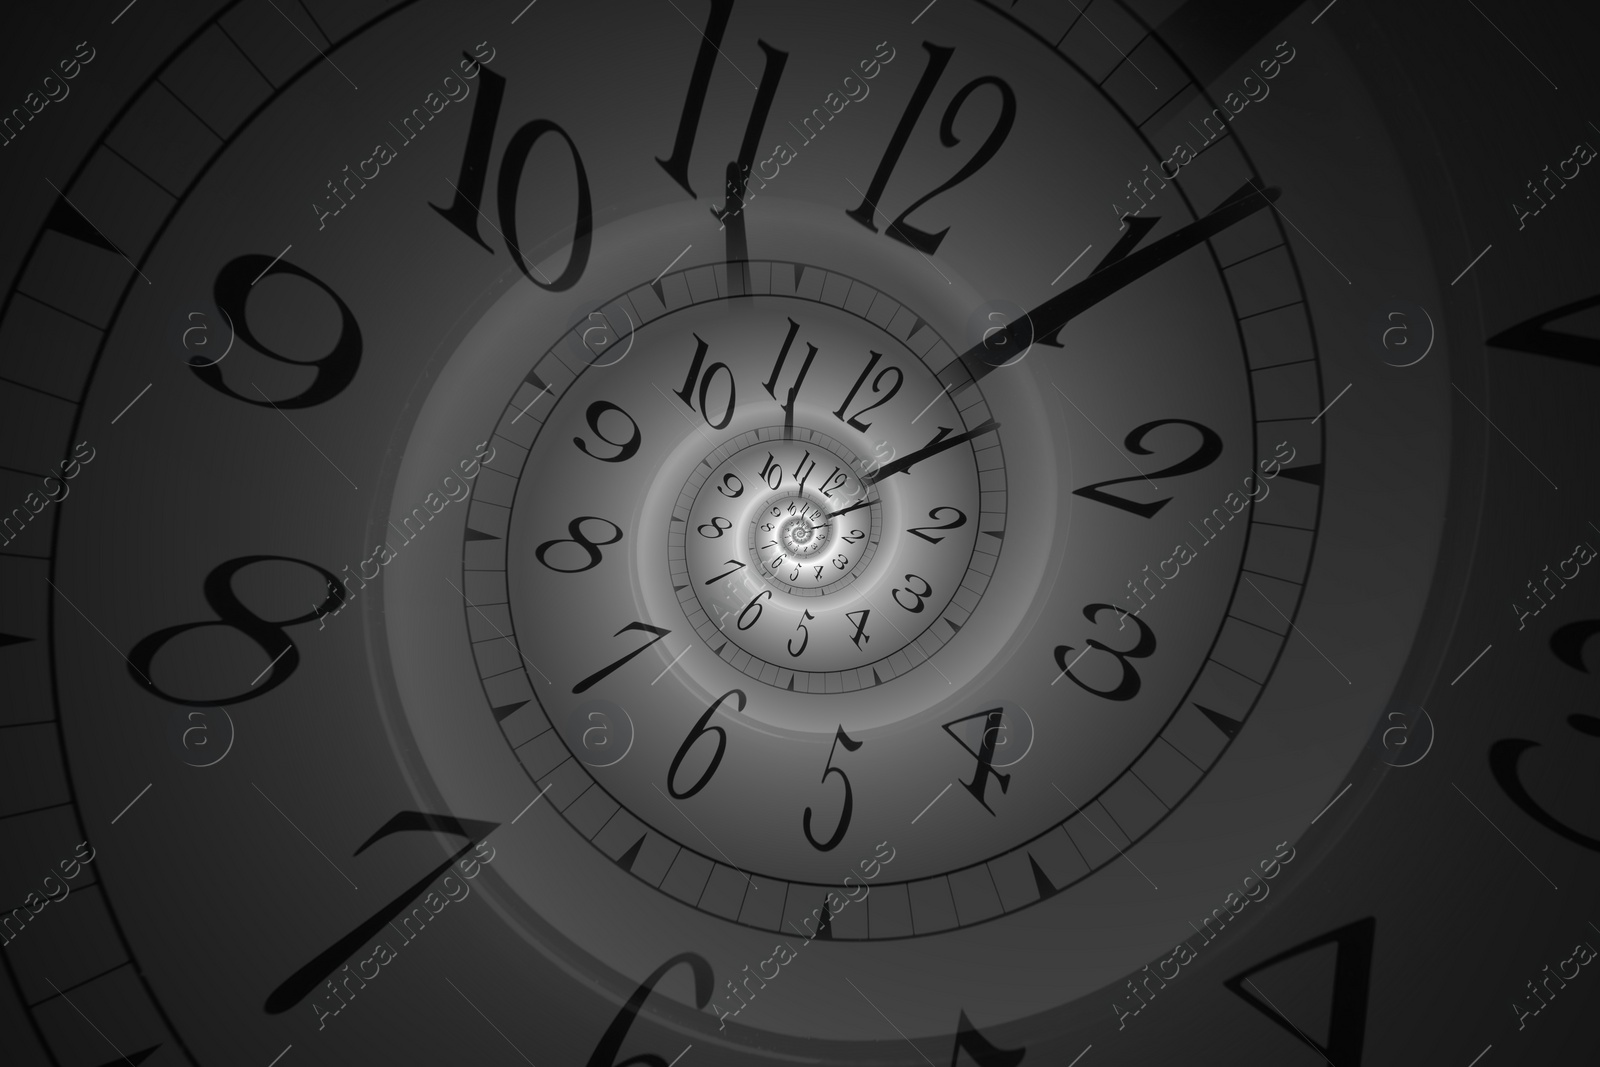 Image of Infinity and other time related concepts. White clock face twisted in spiral, shading fractal pattern